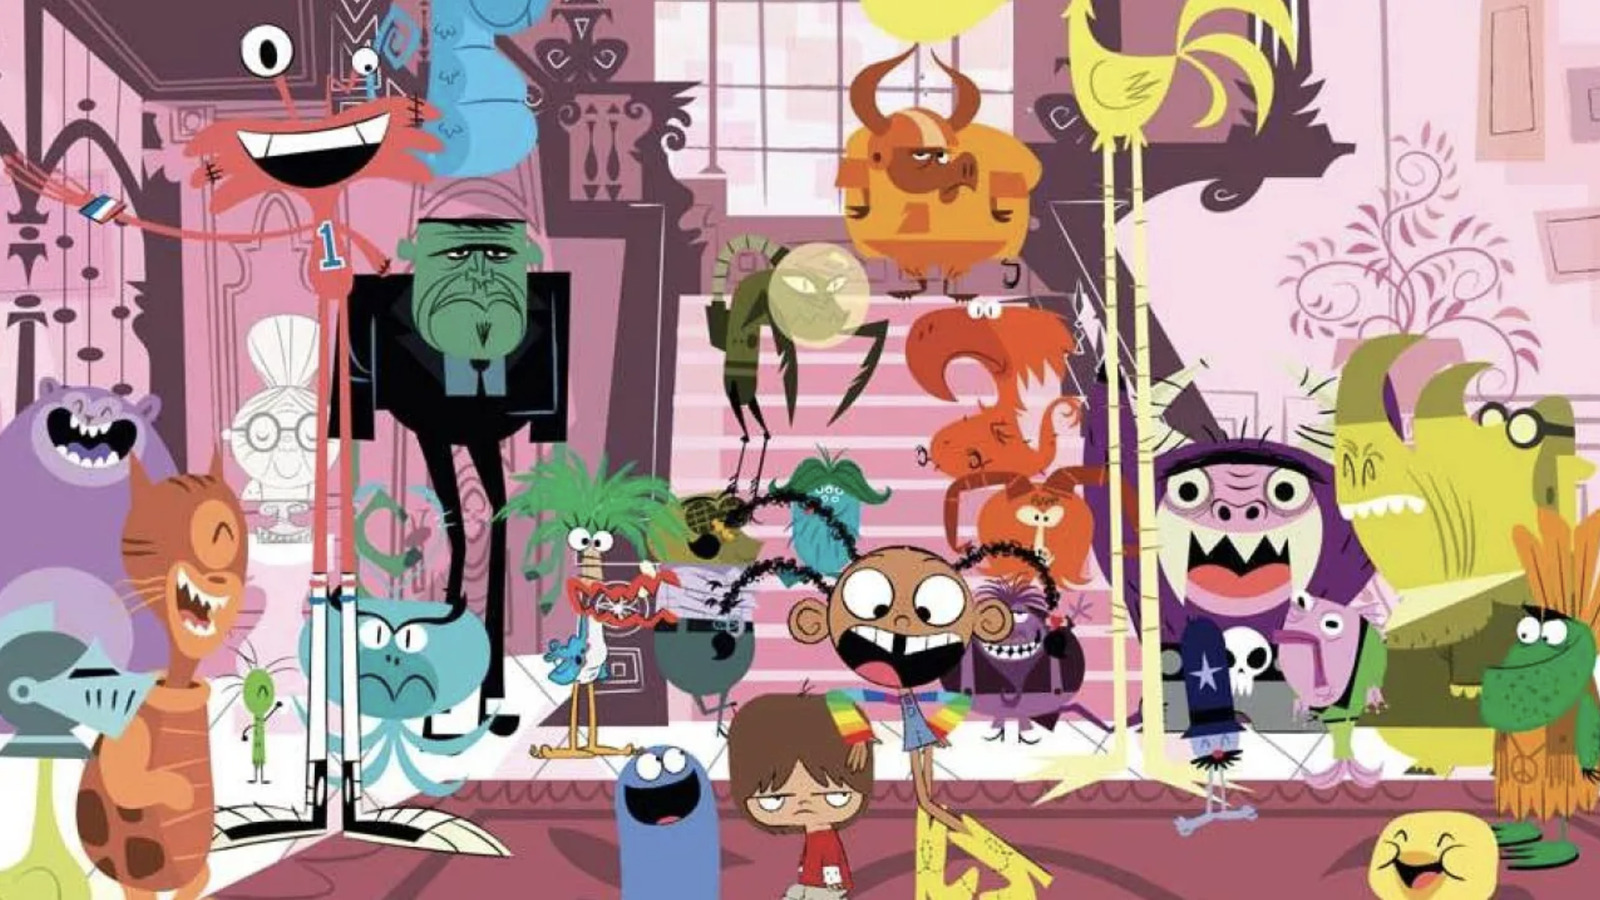 Blues home for imaginary friends